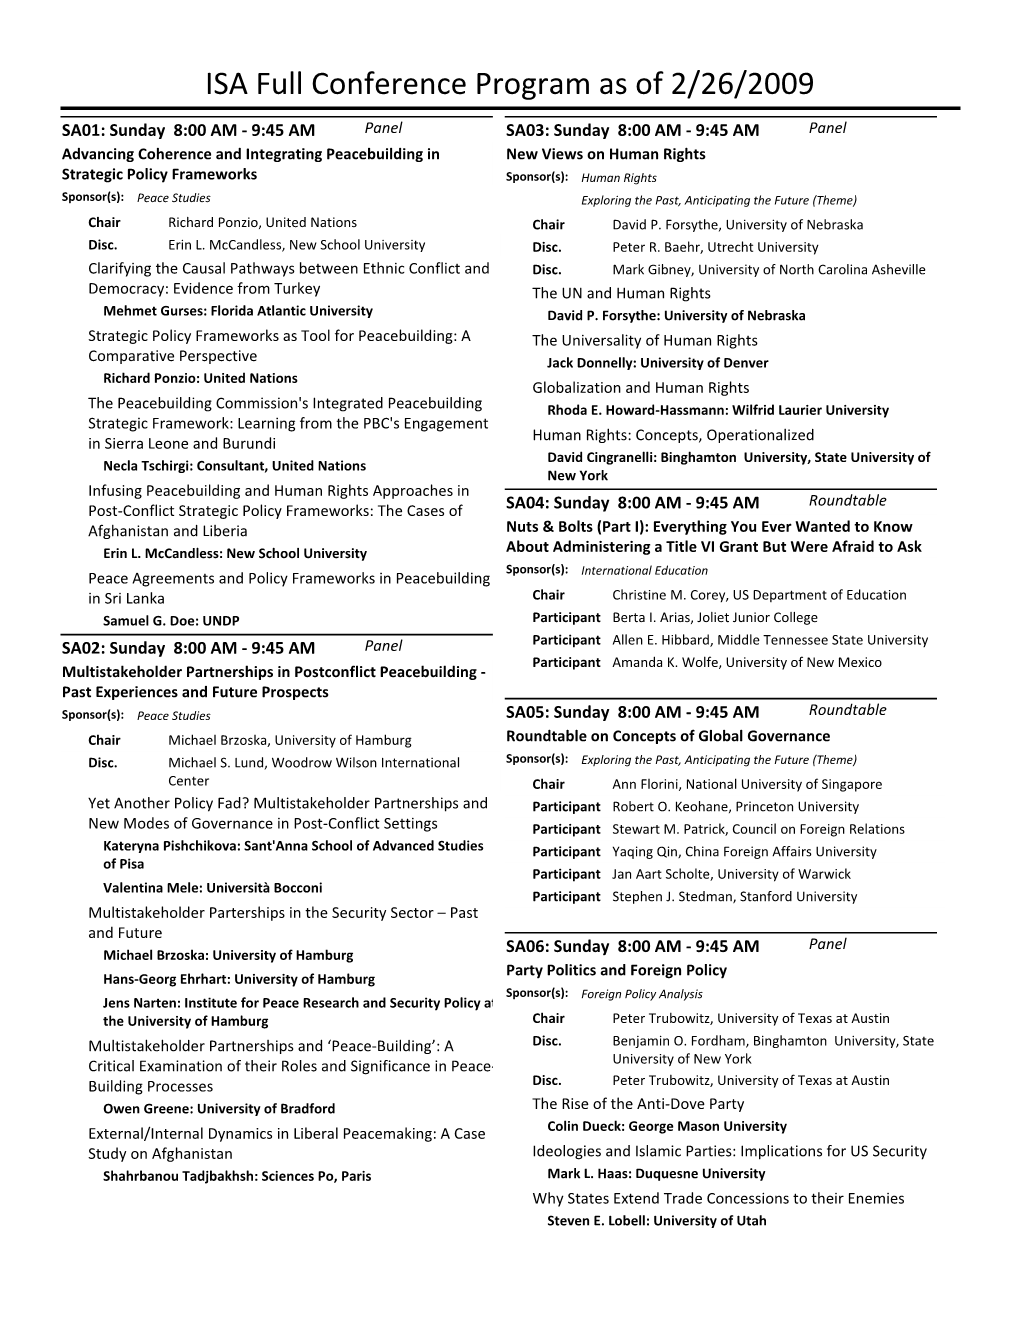 ISA Full Conference Program As of 2/26/2009